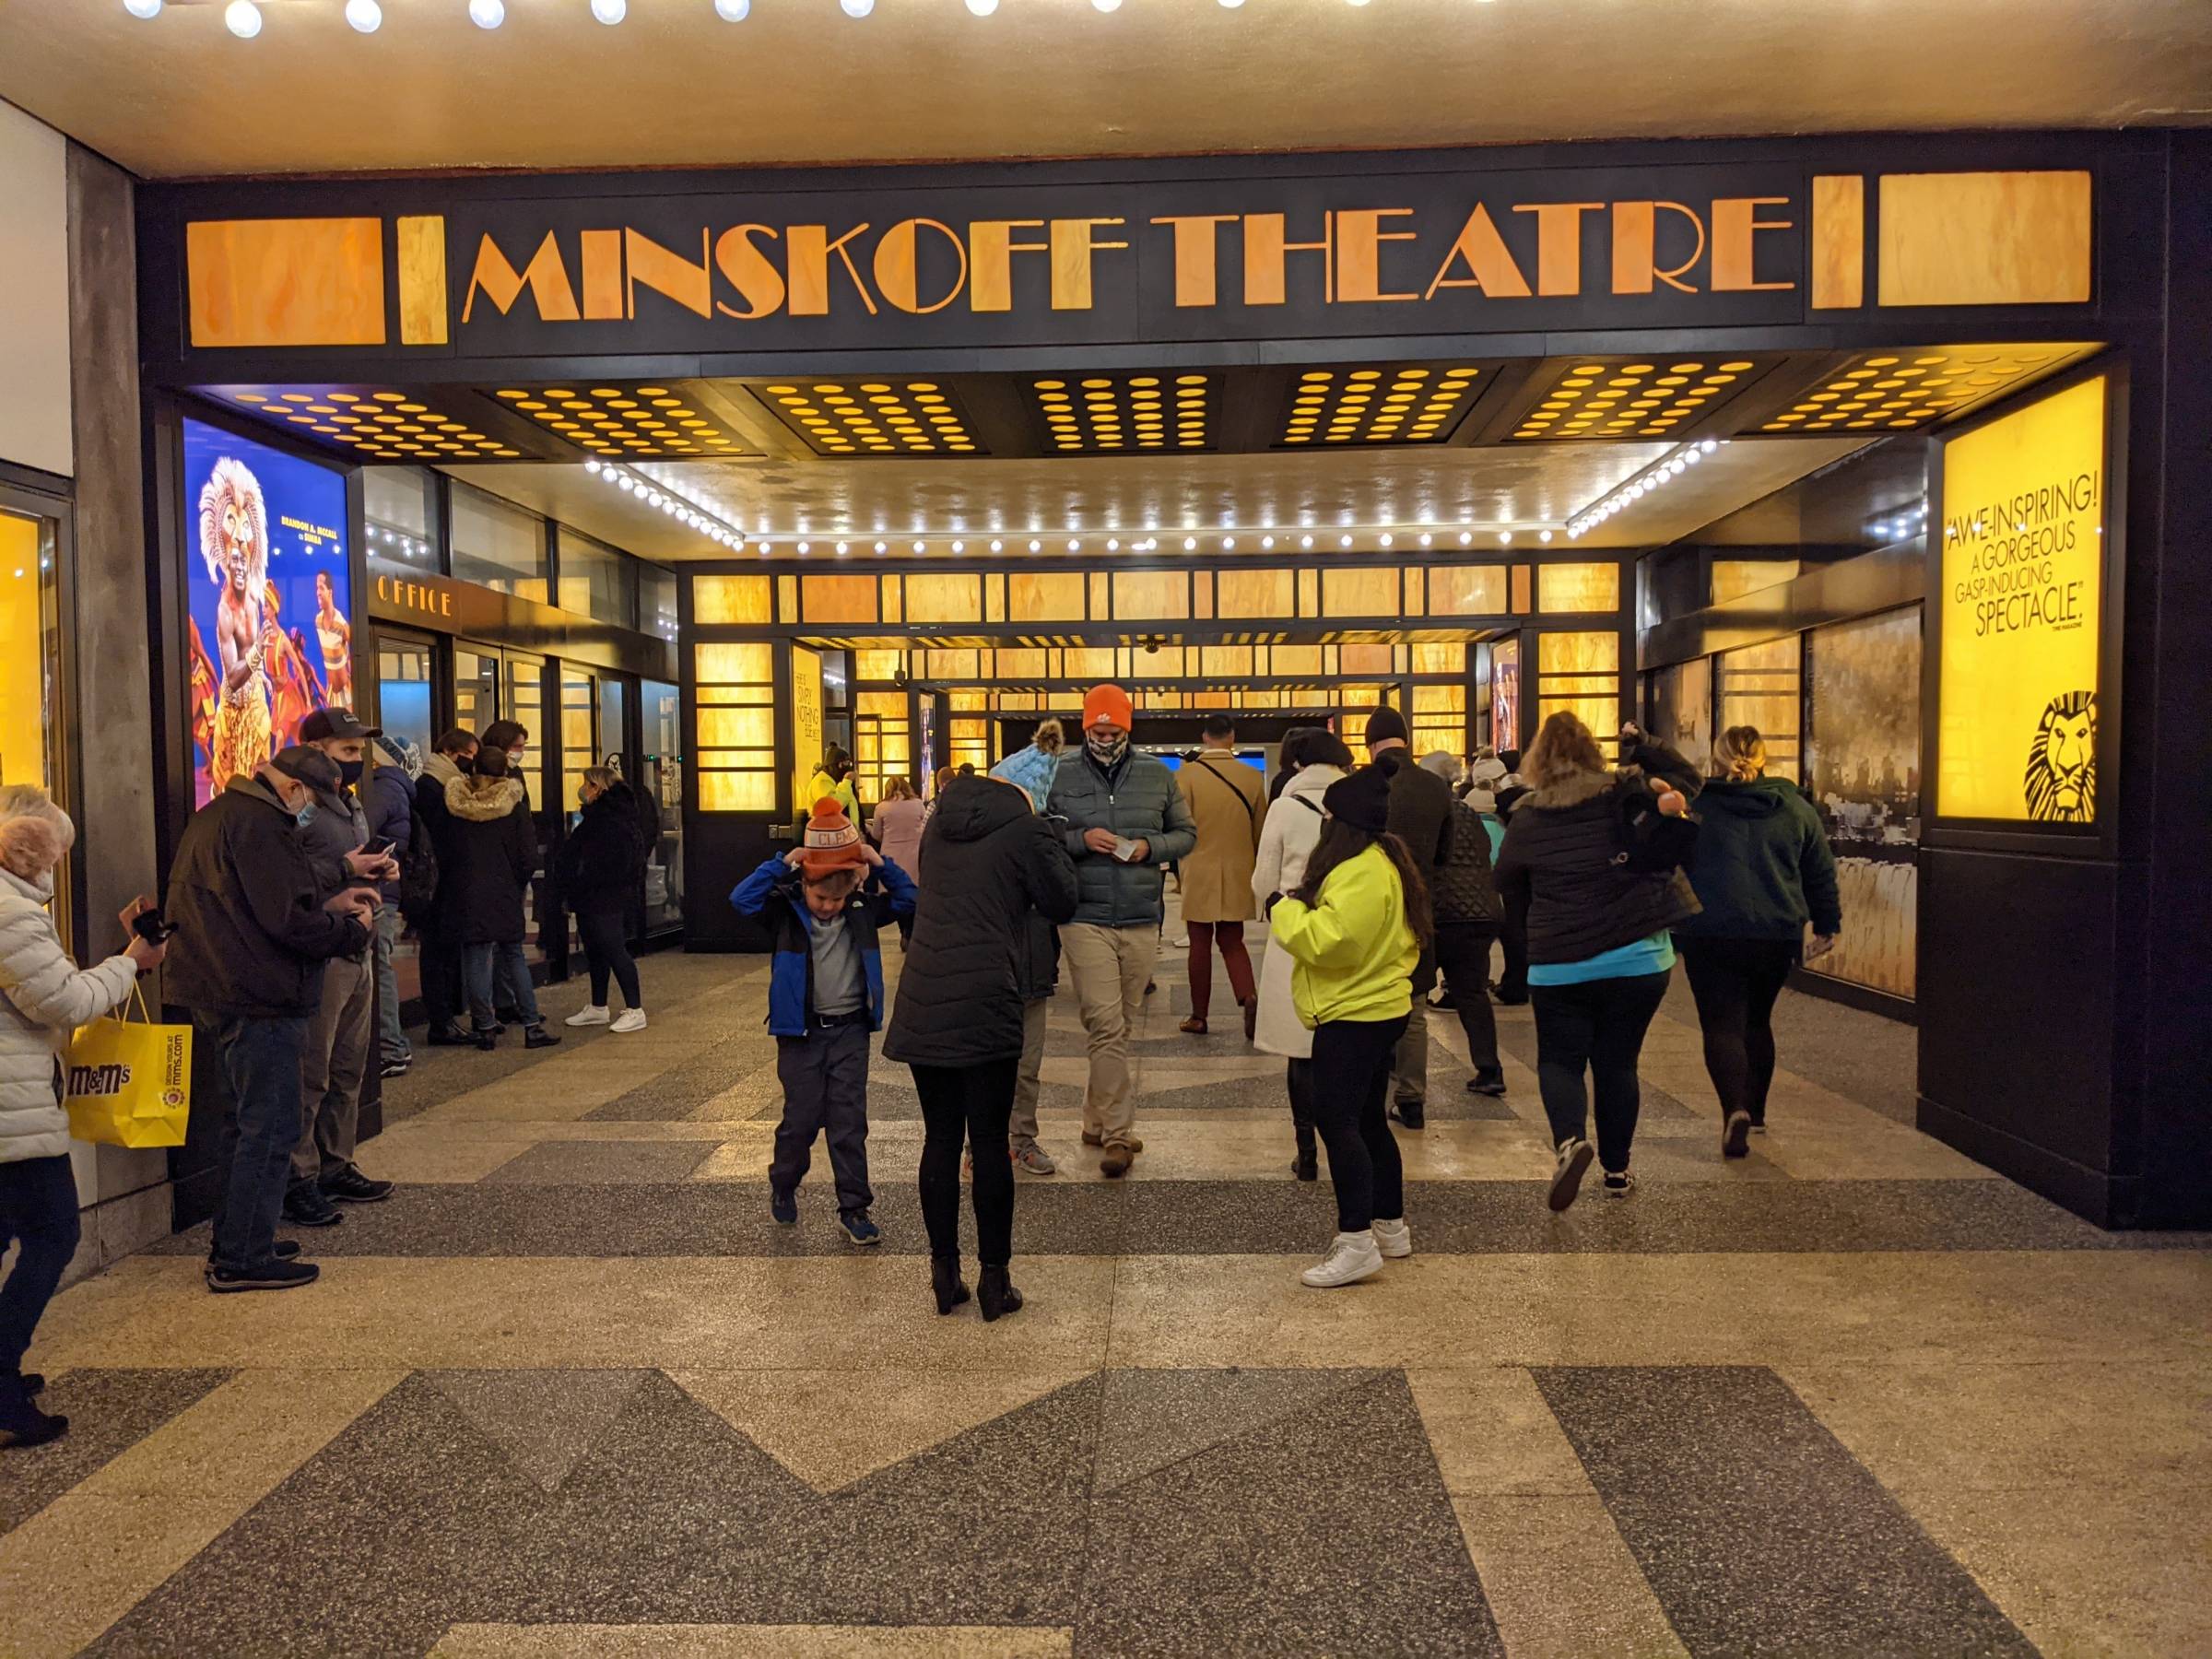 entrance to minskoff theatre